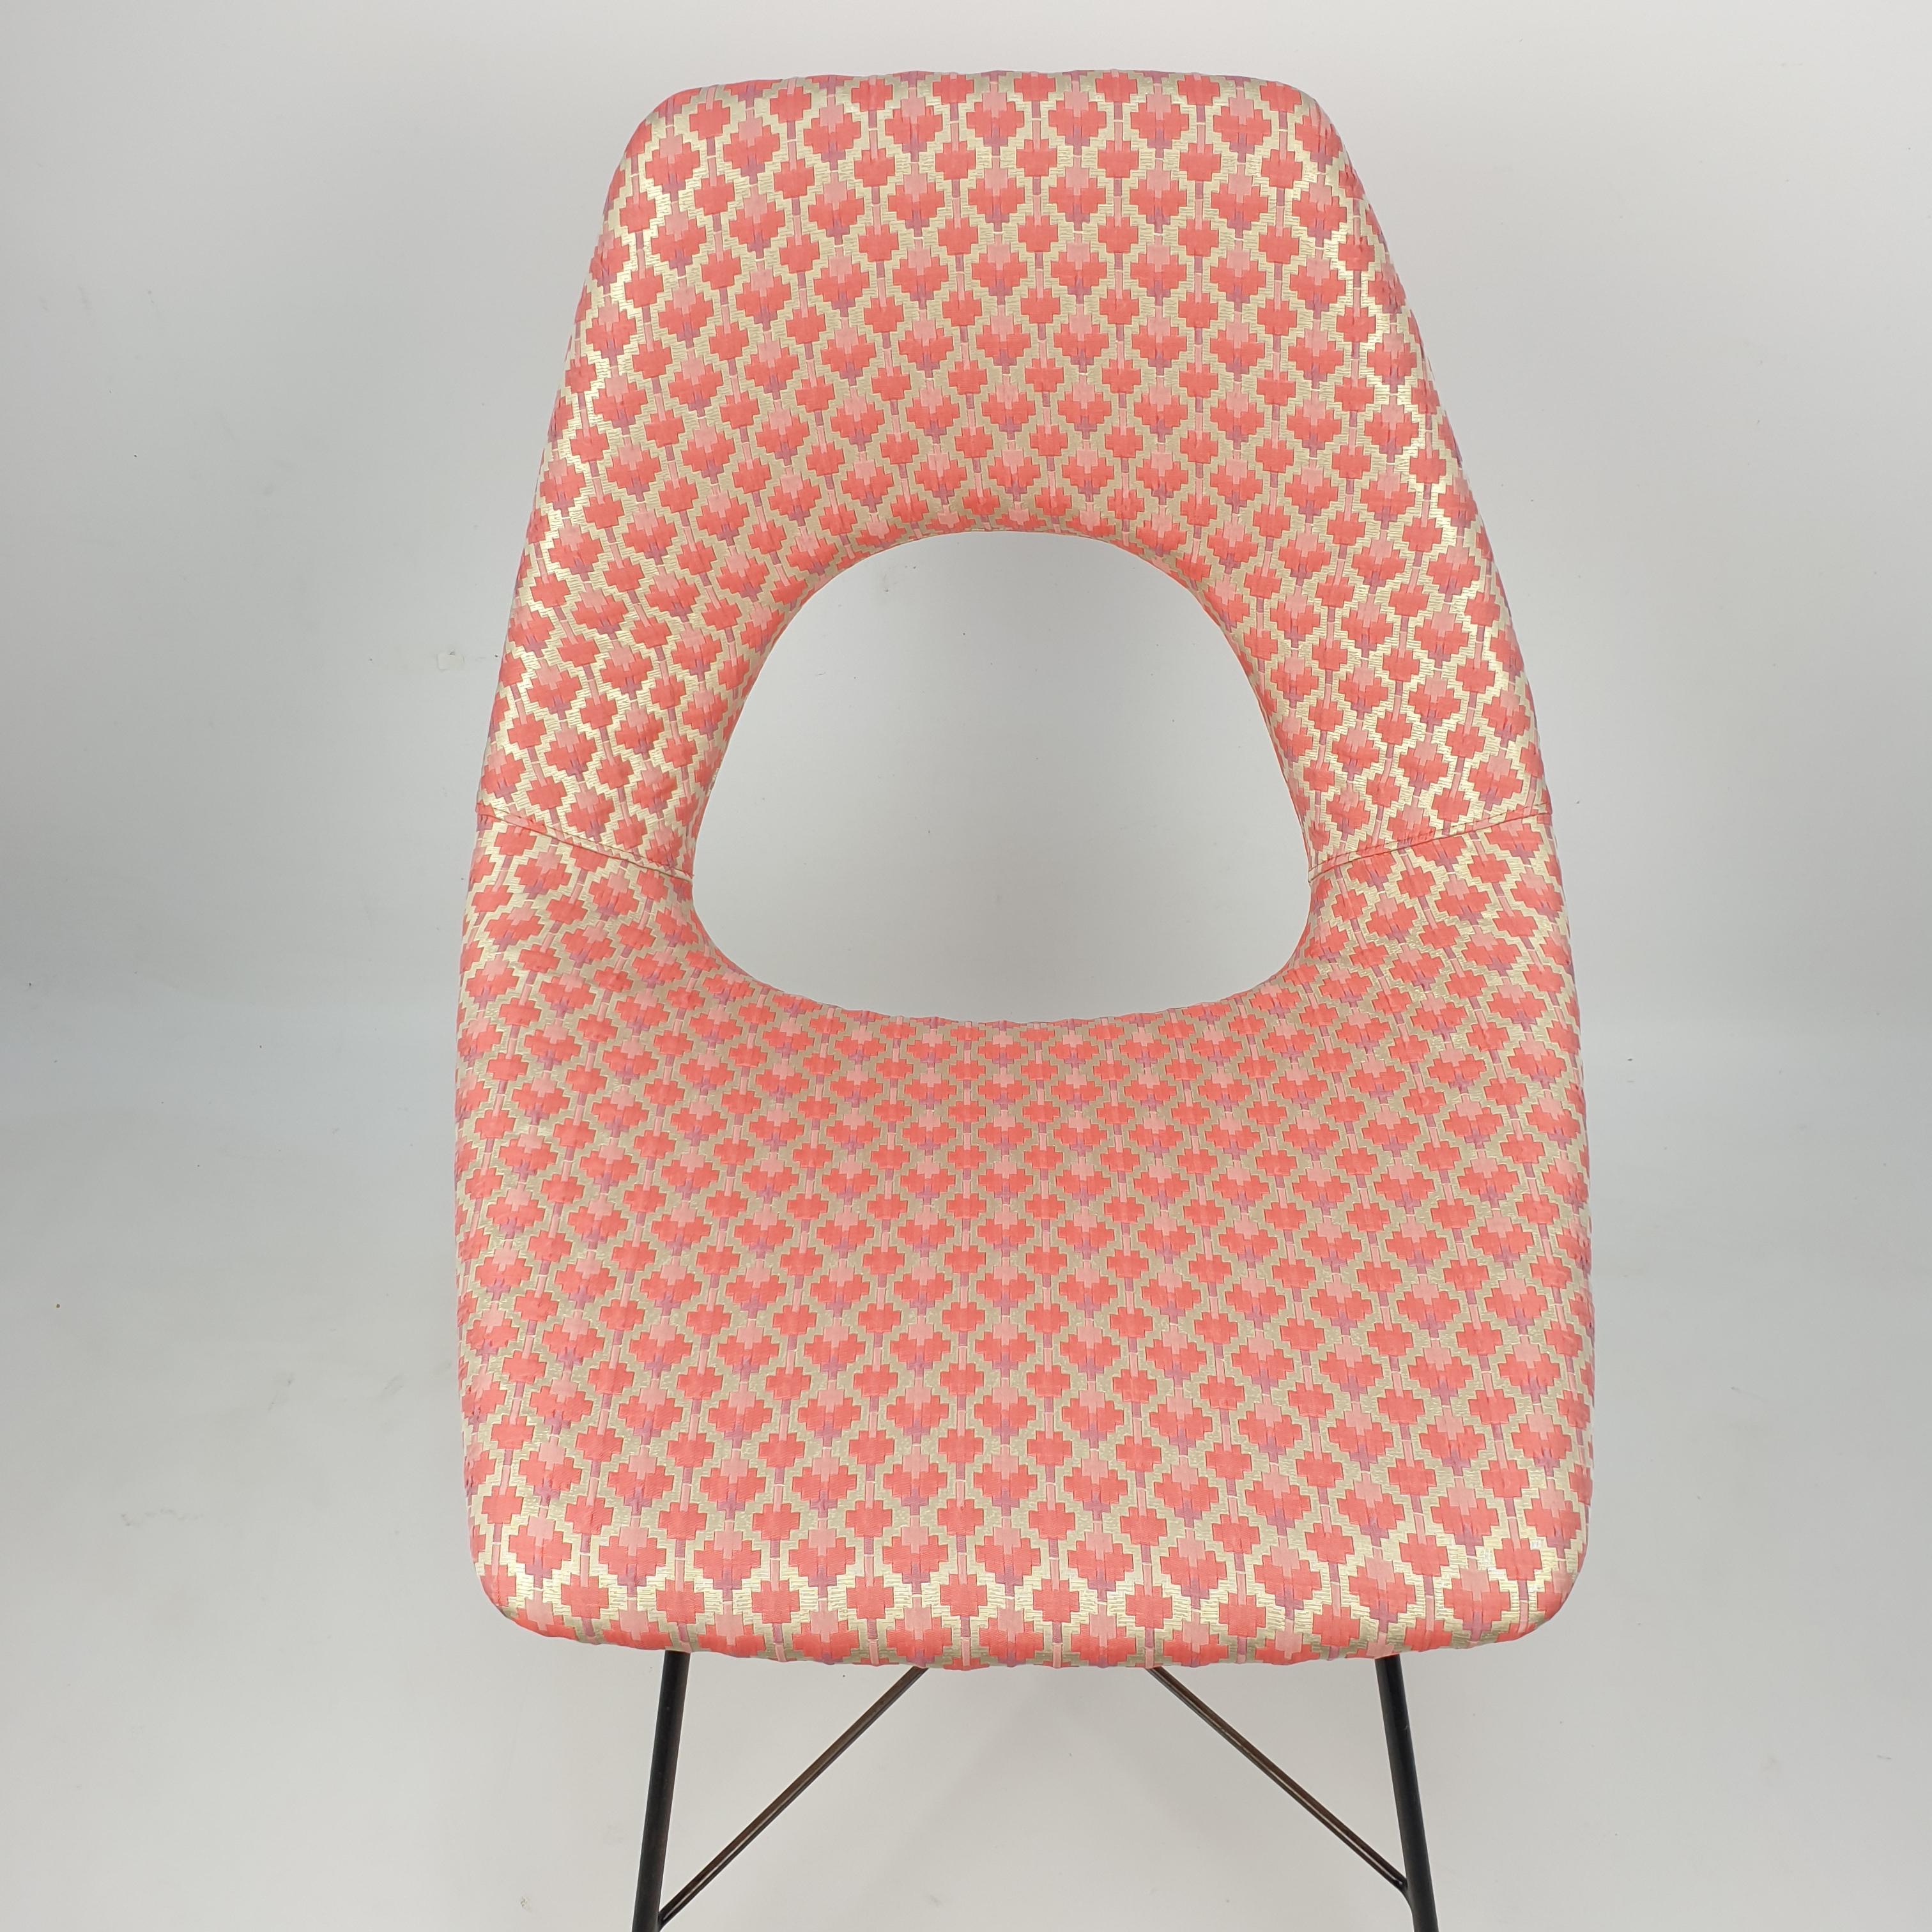 Metal Cosmos Dining Chair by Augusto Bozzi for Saporiti Italia, 1950s For Sale